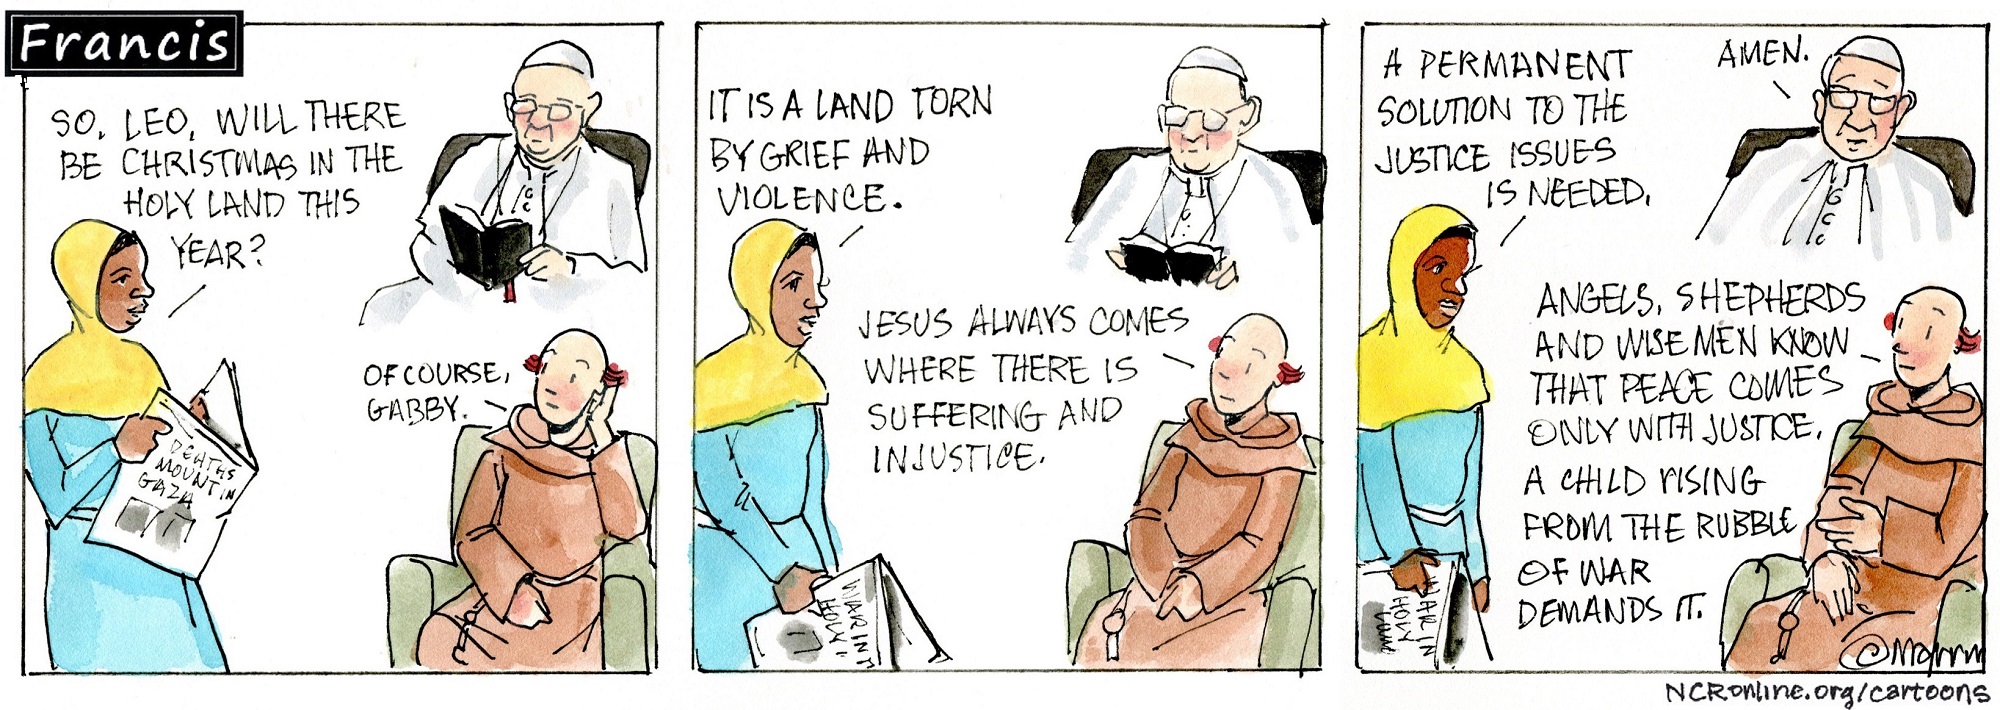 Francis, the comic strip: Peace only comes with justice. 